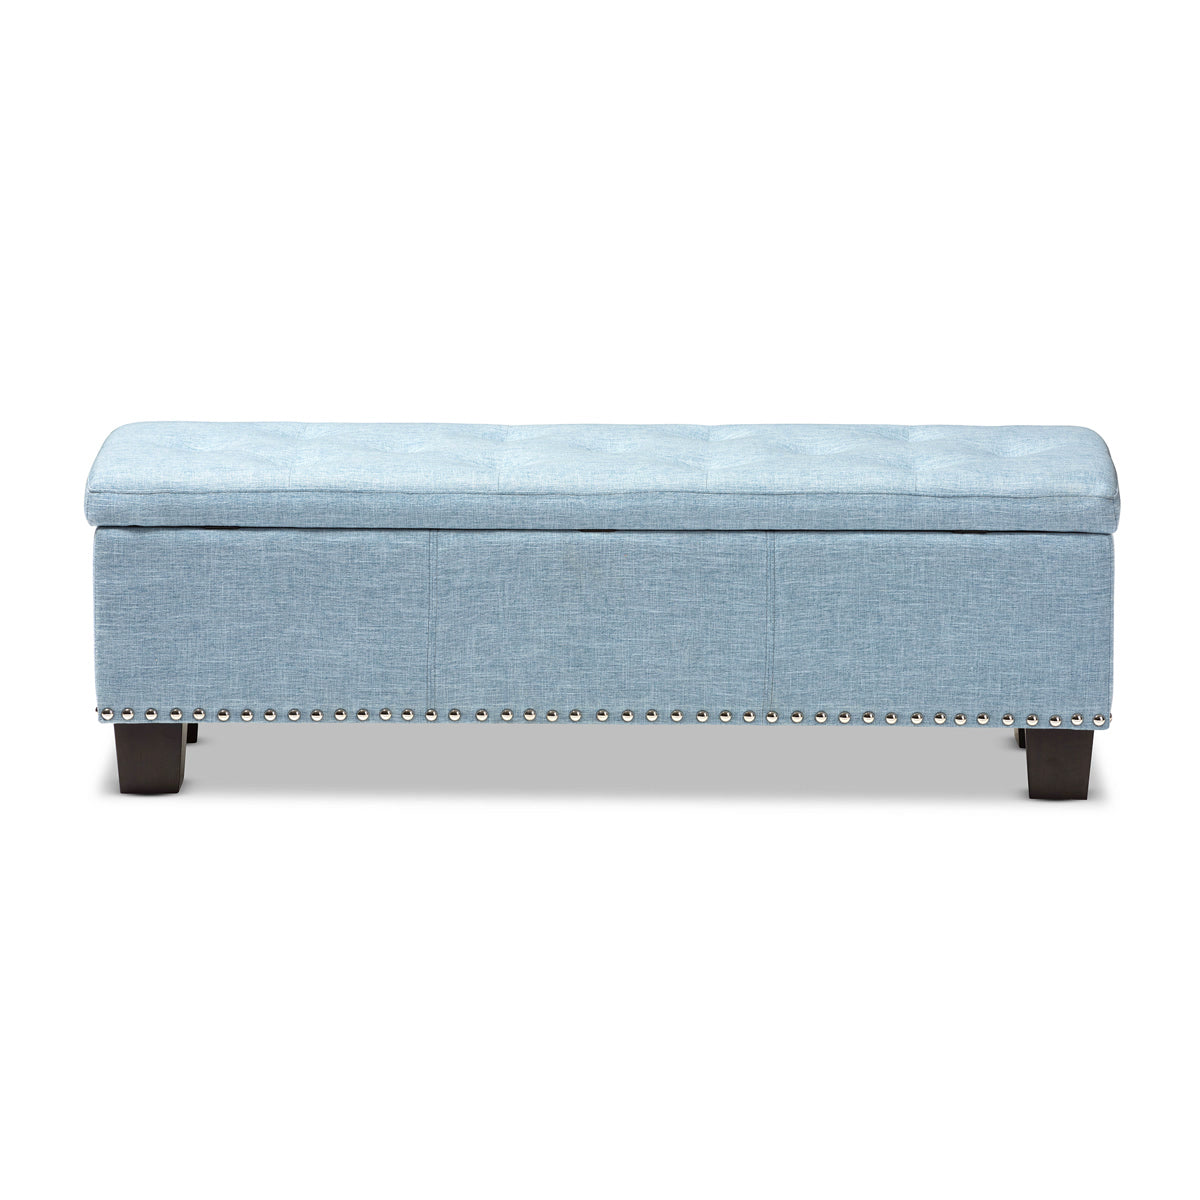 Baxton Studio Hannah Modern and Contemporary Light Blue Fabric Upholstered Button-Tufting Storage Ottoman Bench Baxton Studio-benches-Minimal And Modern - 6